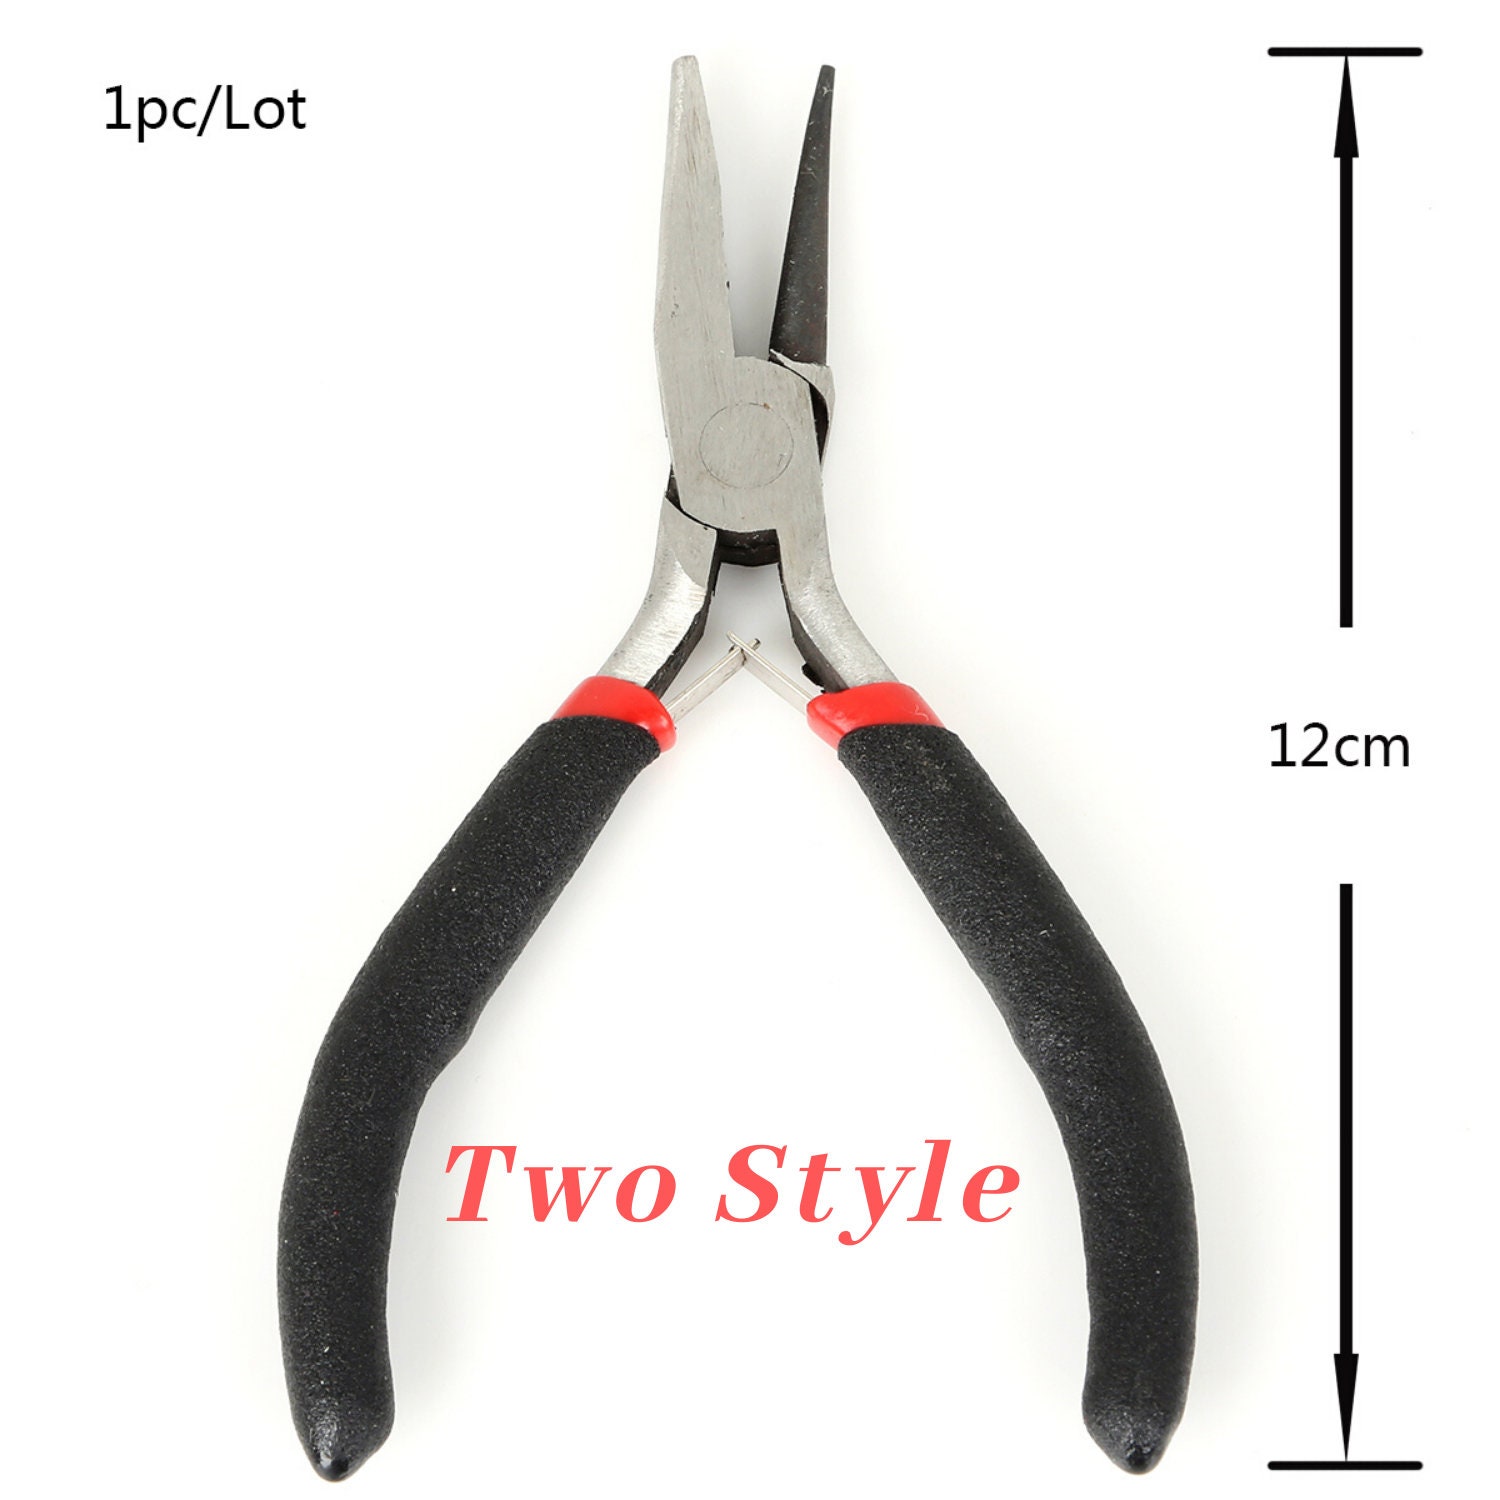 Anezus 4pcs Jewelry Pliers Tool Set Includes Needle Round Wire Cutters and Bent Nose Pliers for Jewelry Beading Repair Making Supplies